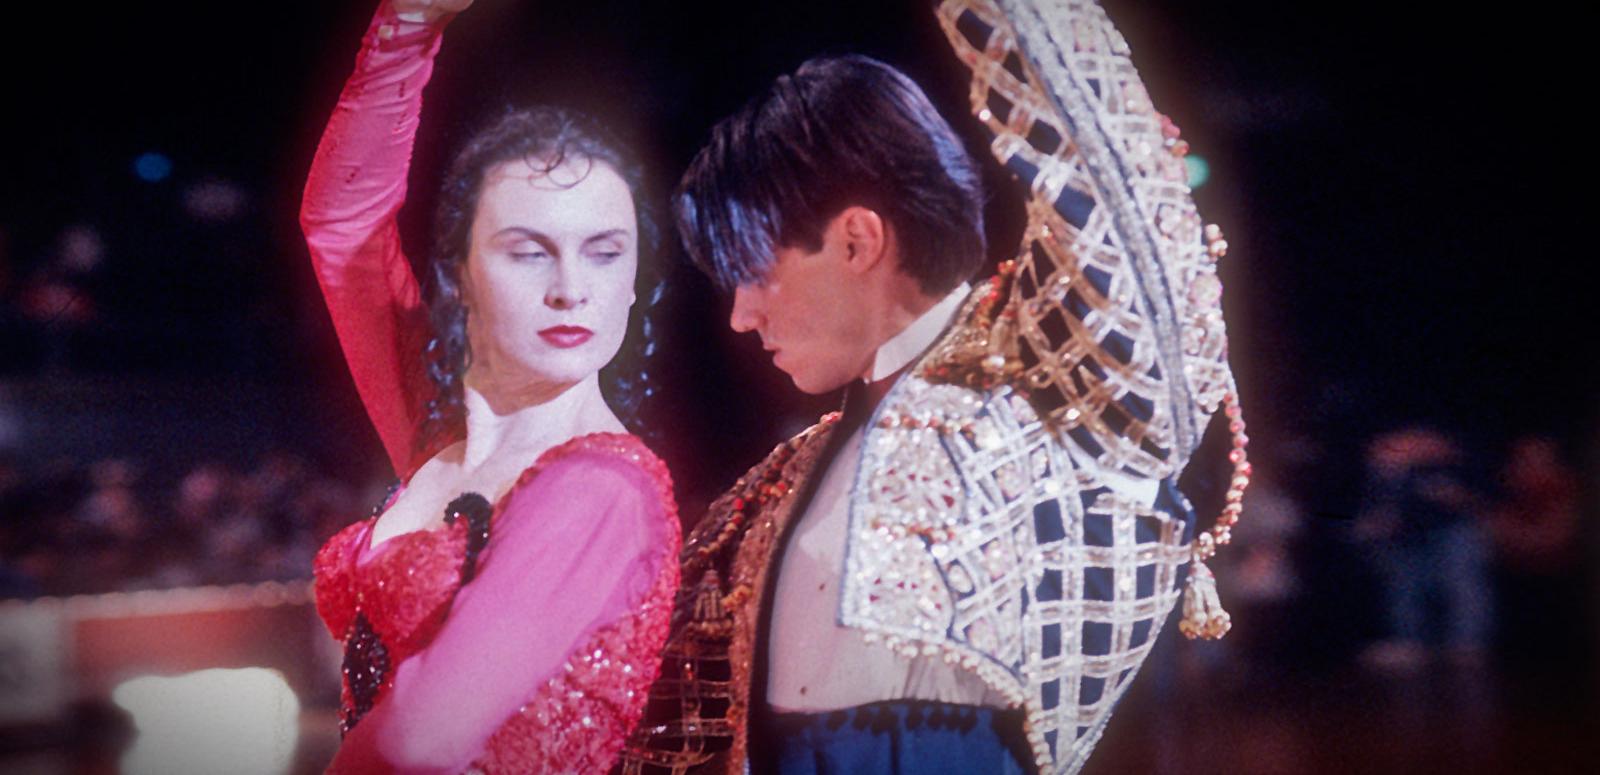 Tara Morice and Paul Mercurio in a dance pose in a scene from the film Strictly Ballroom. She is wearing a red and black beaded and ruffled flamenco style dress and he is wearing a spanish style gold and black bolero jacket. 